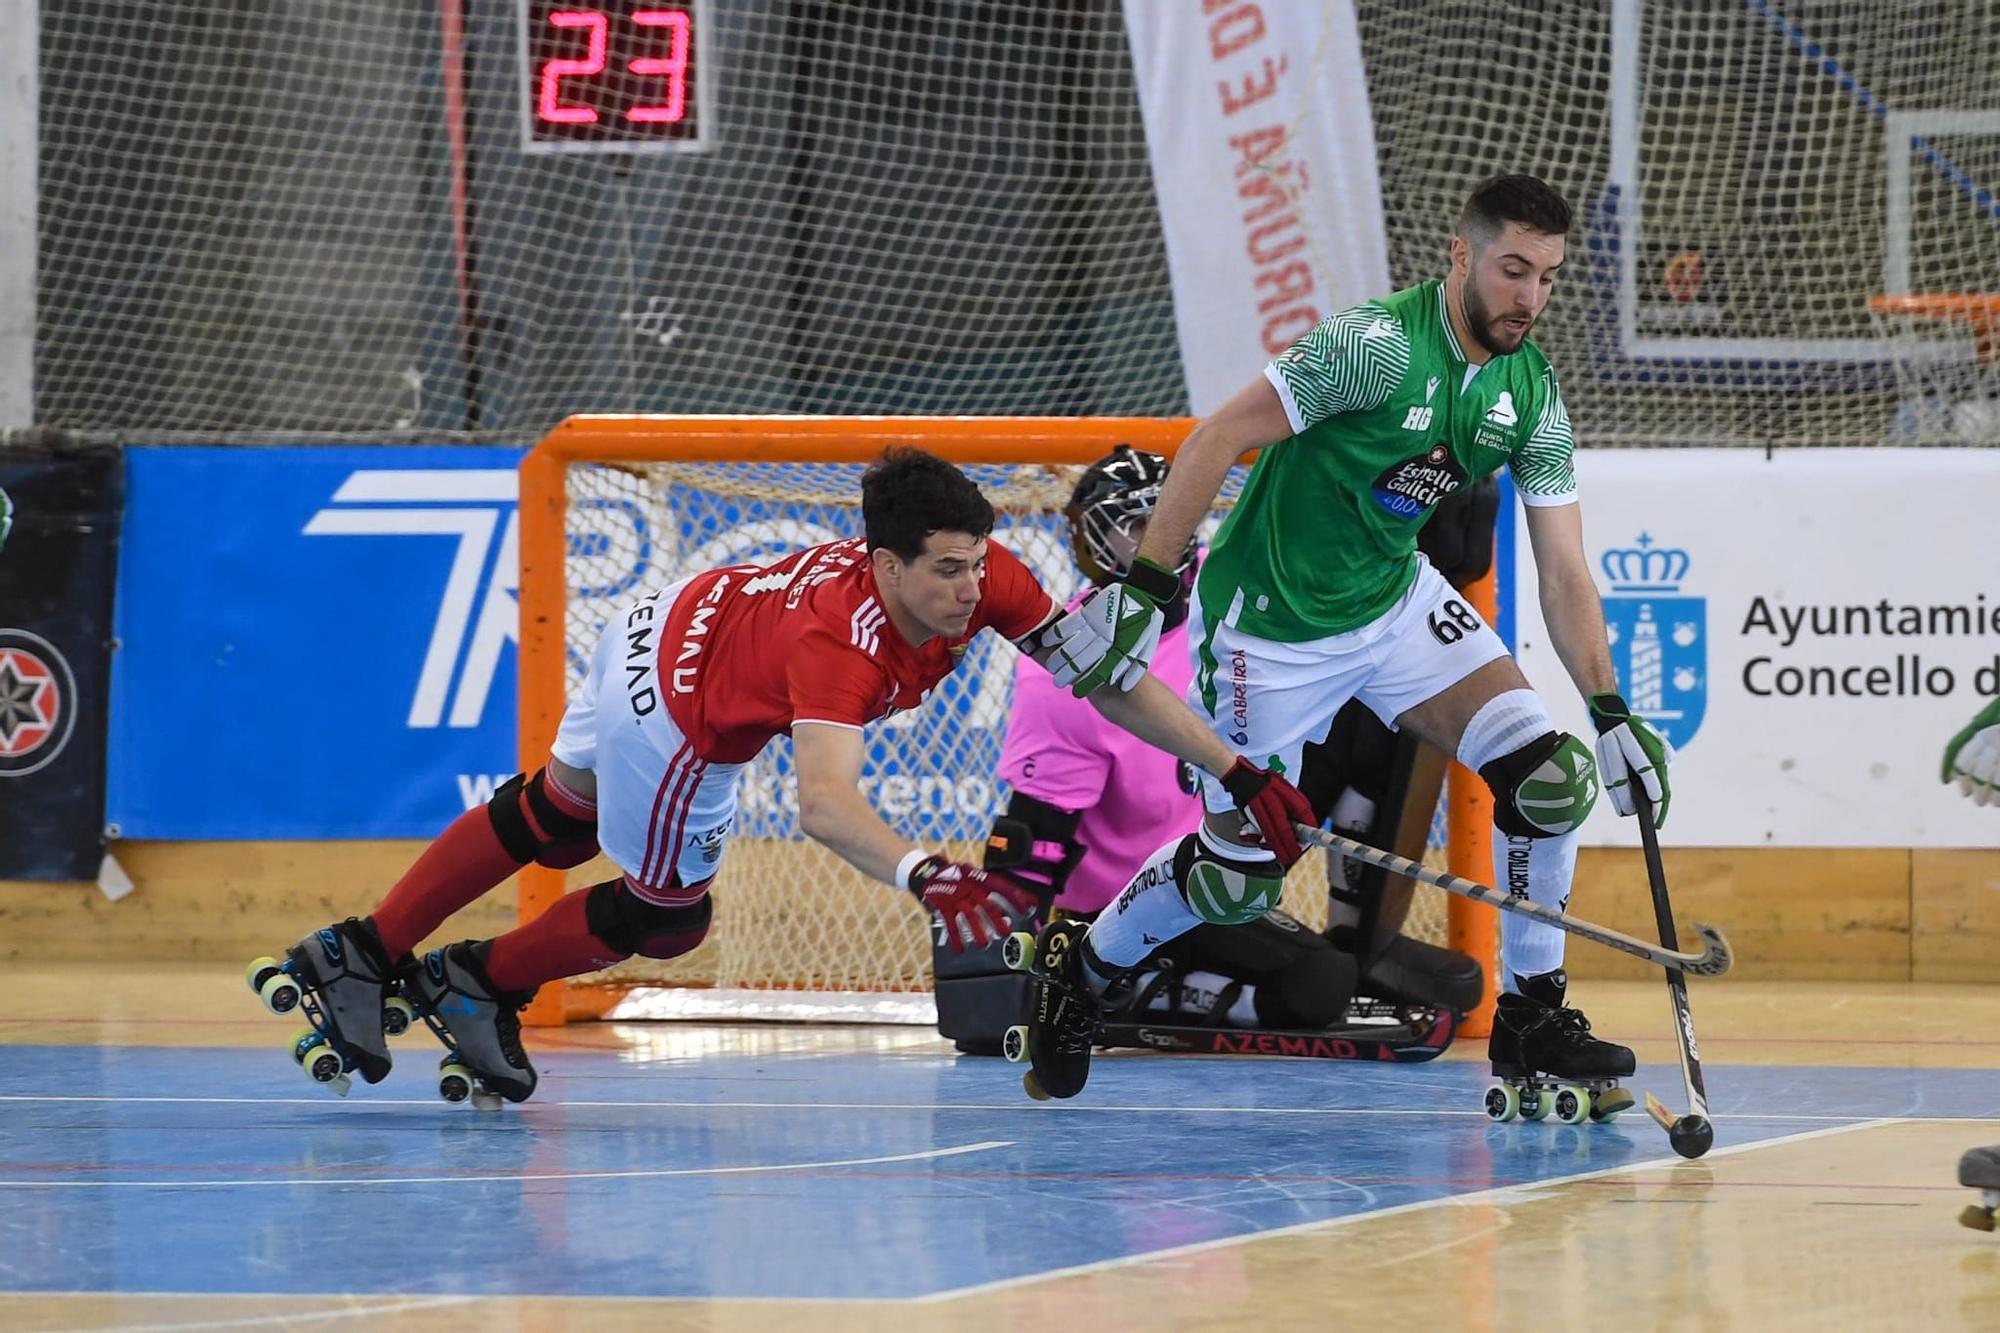 Semifinales Golden Cup hockey patines | Liceo - Benfica (3-4)